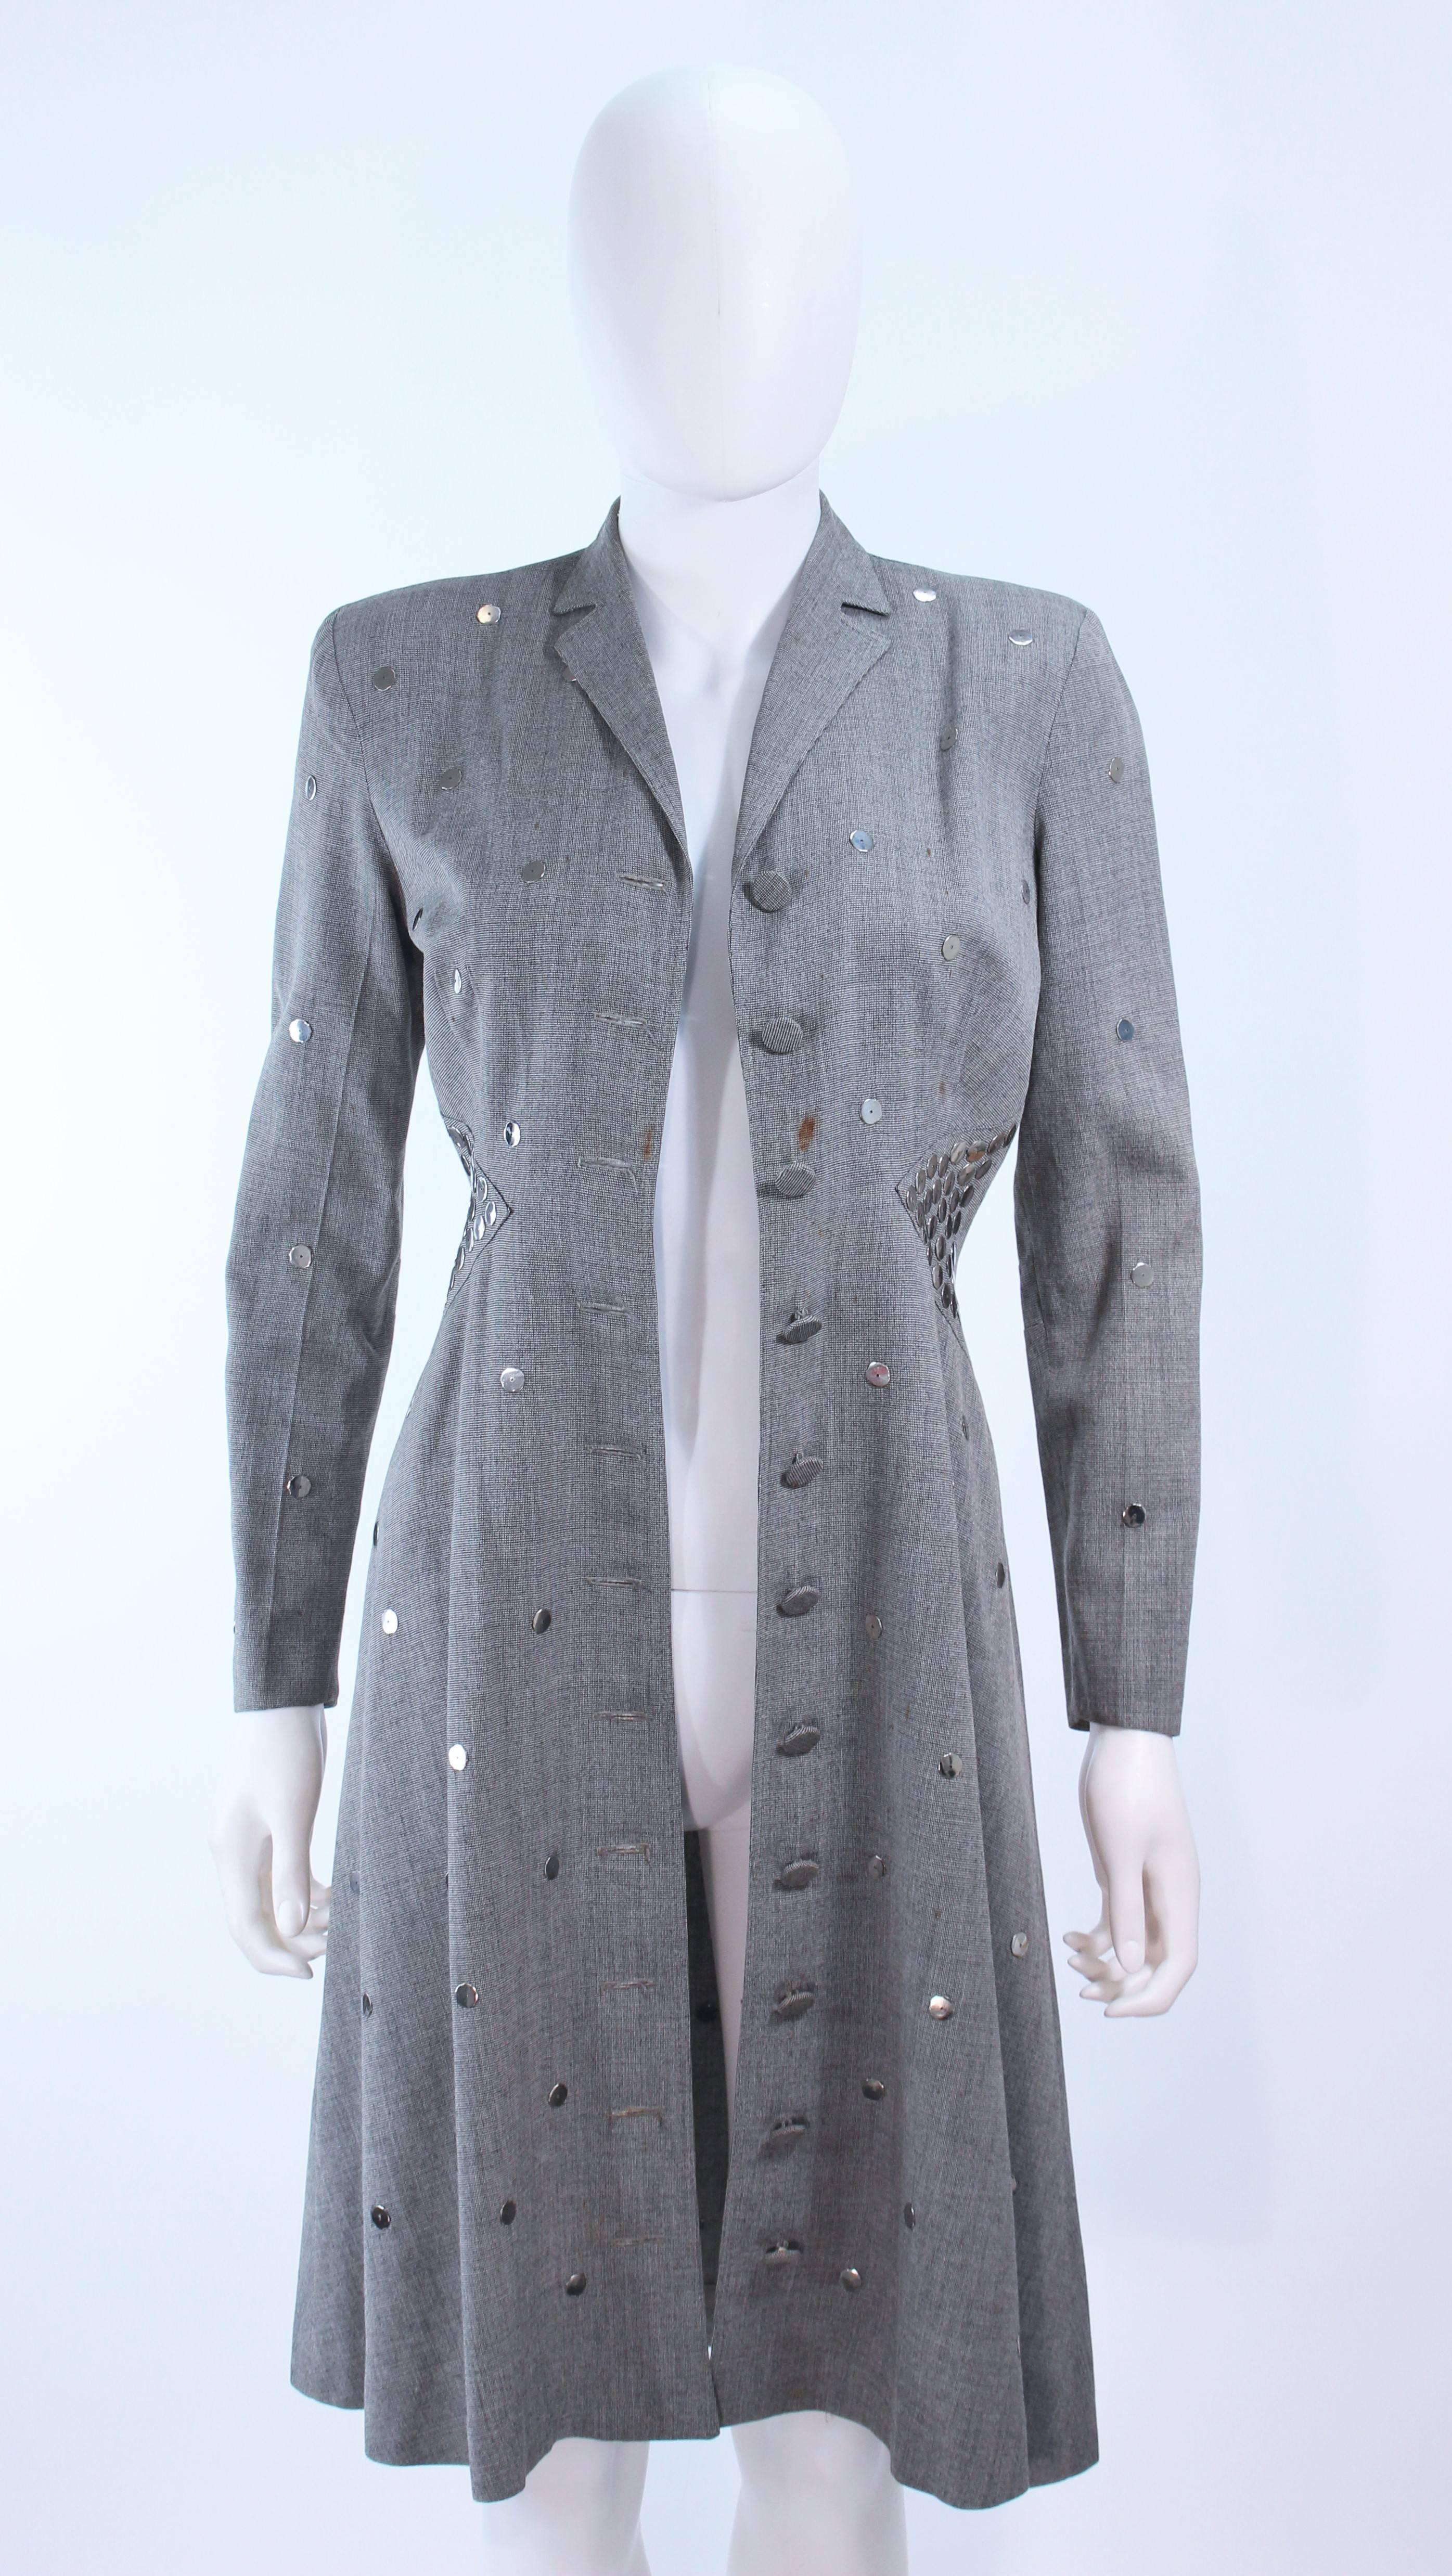 KAY COLLIER Grey Wool Coat Dress with Sequin Applique Size 2 4 For Sale 3